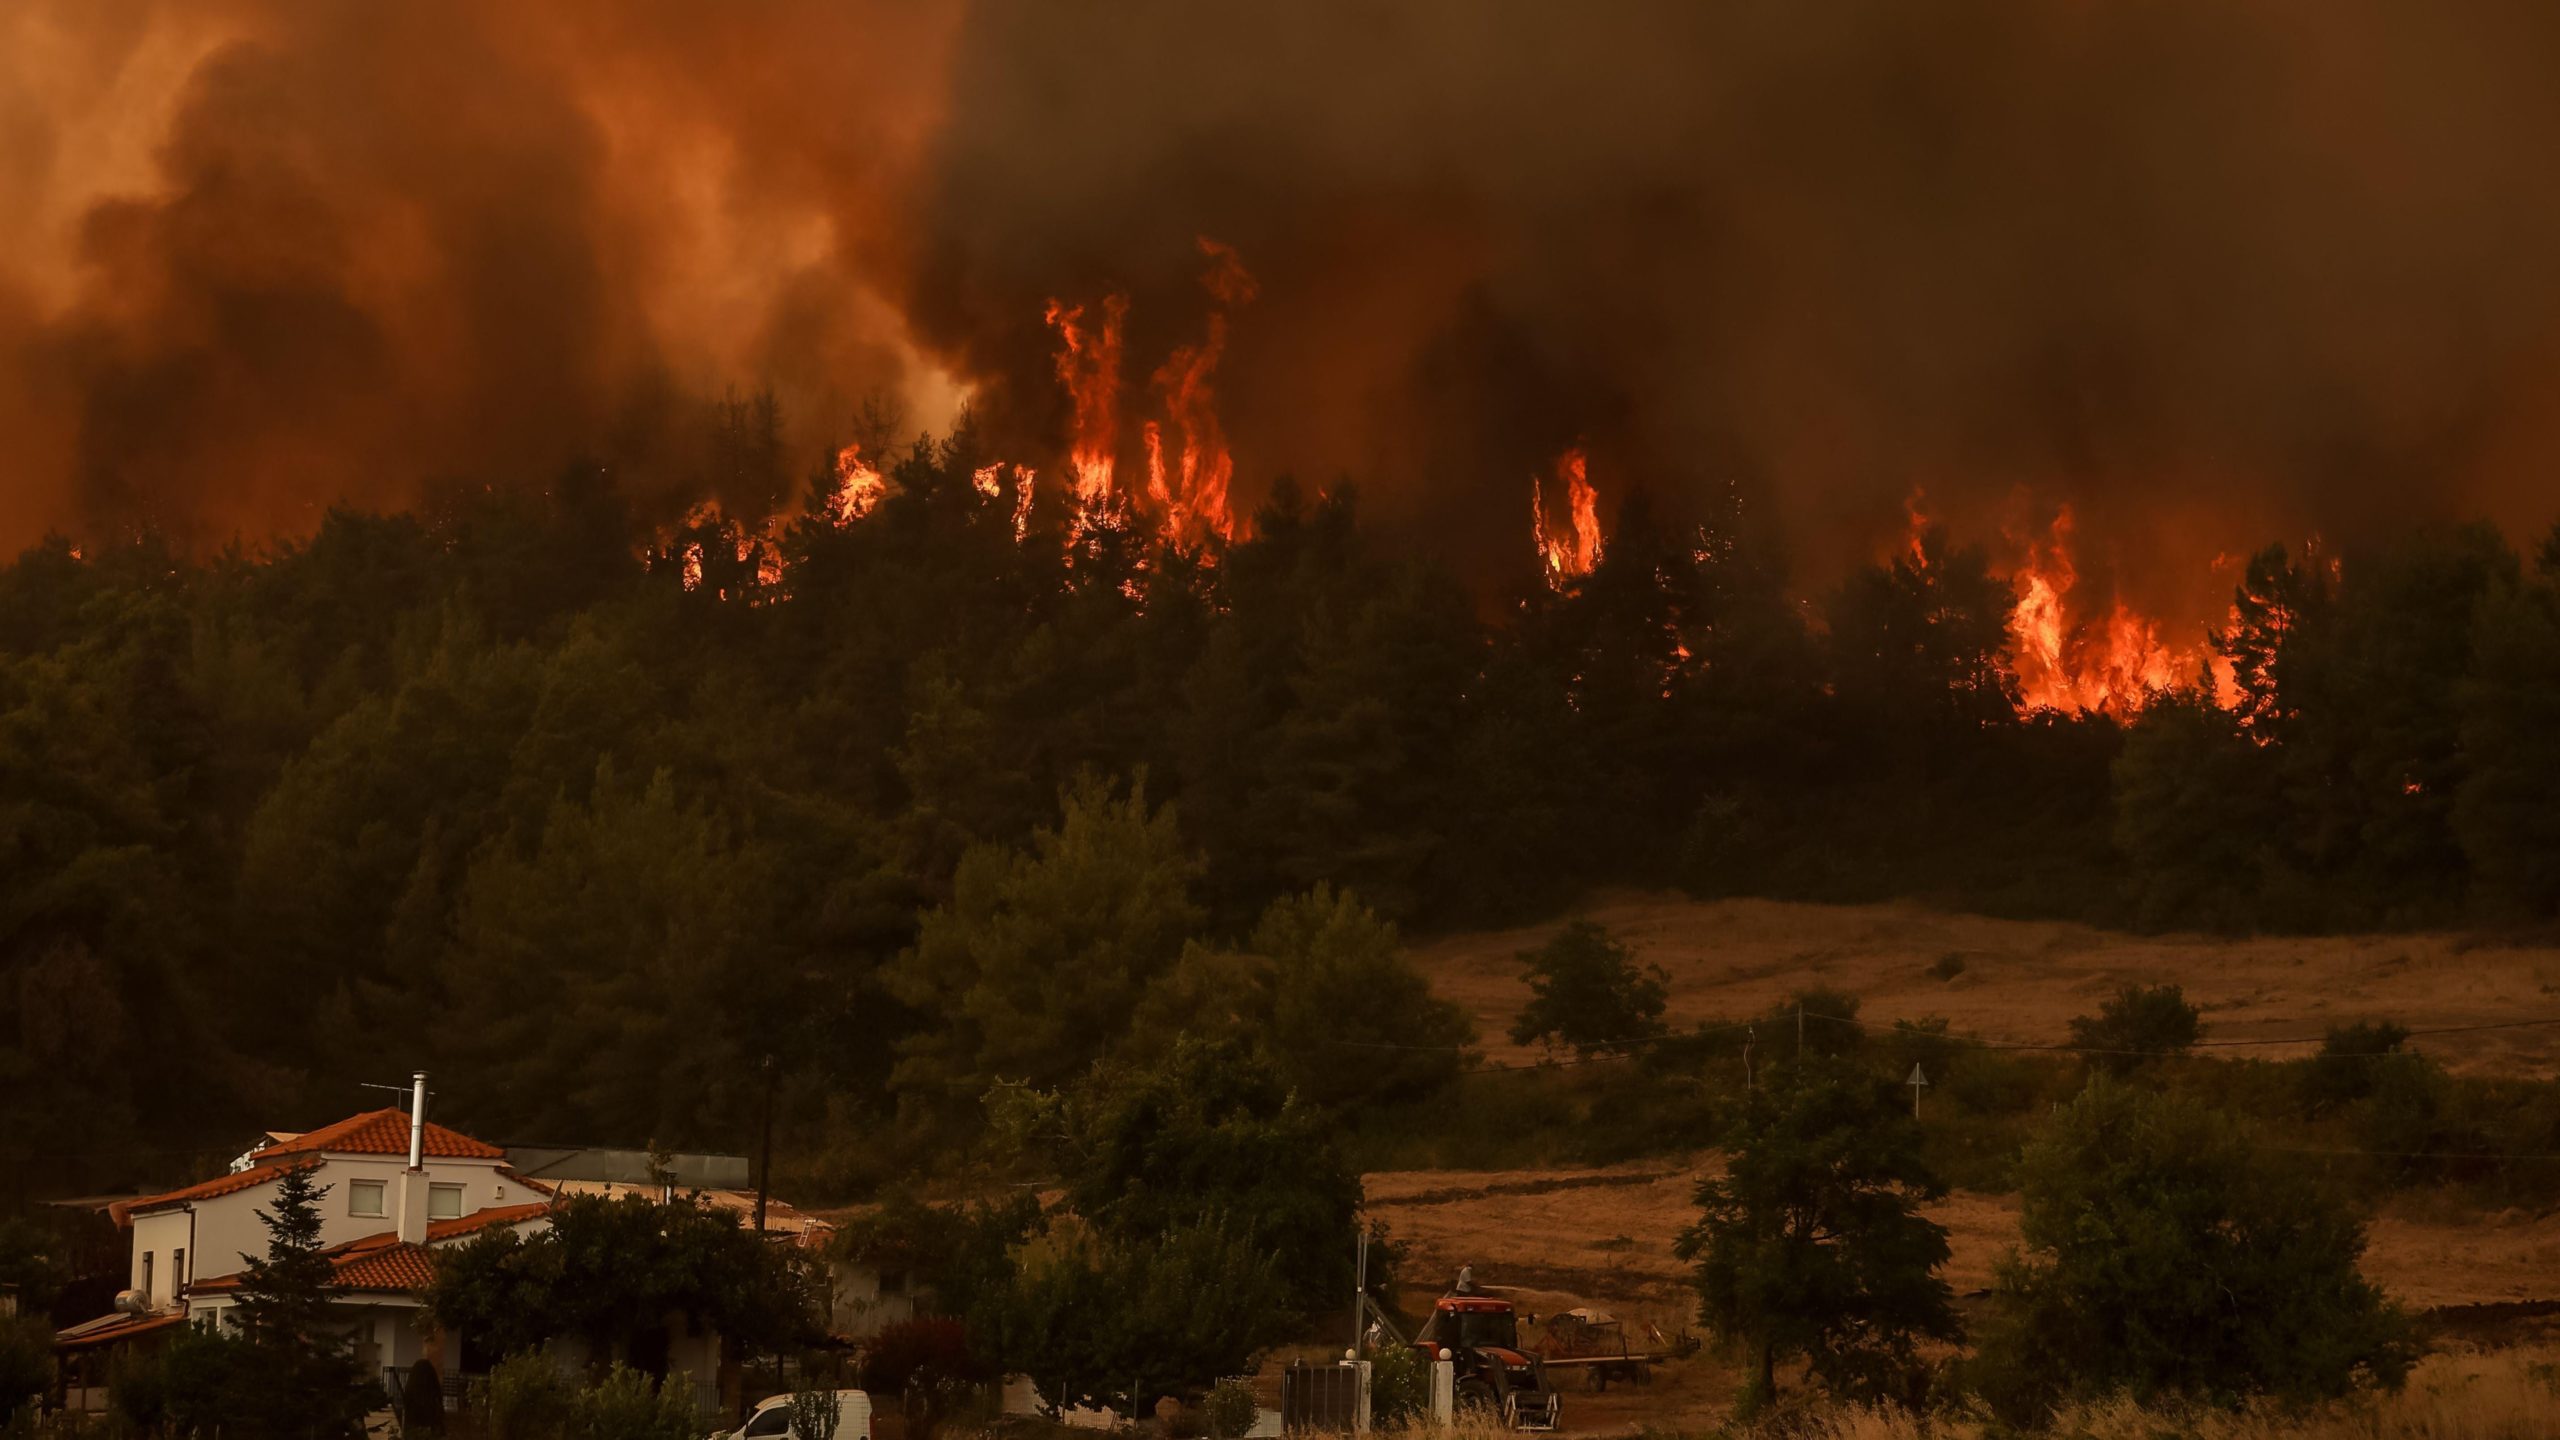 Flames rise from a forest in the village of Kyrynthos, Greece, on August 6, 2021. (Photo: Sotiris Dimitropoulos, Getty Images)